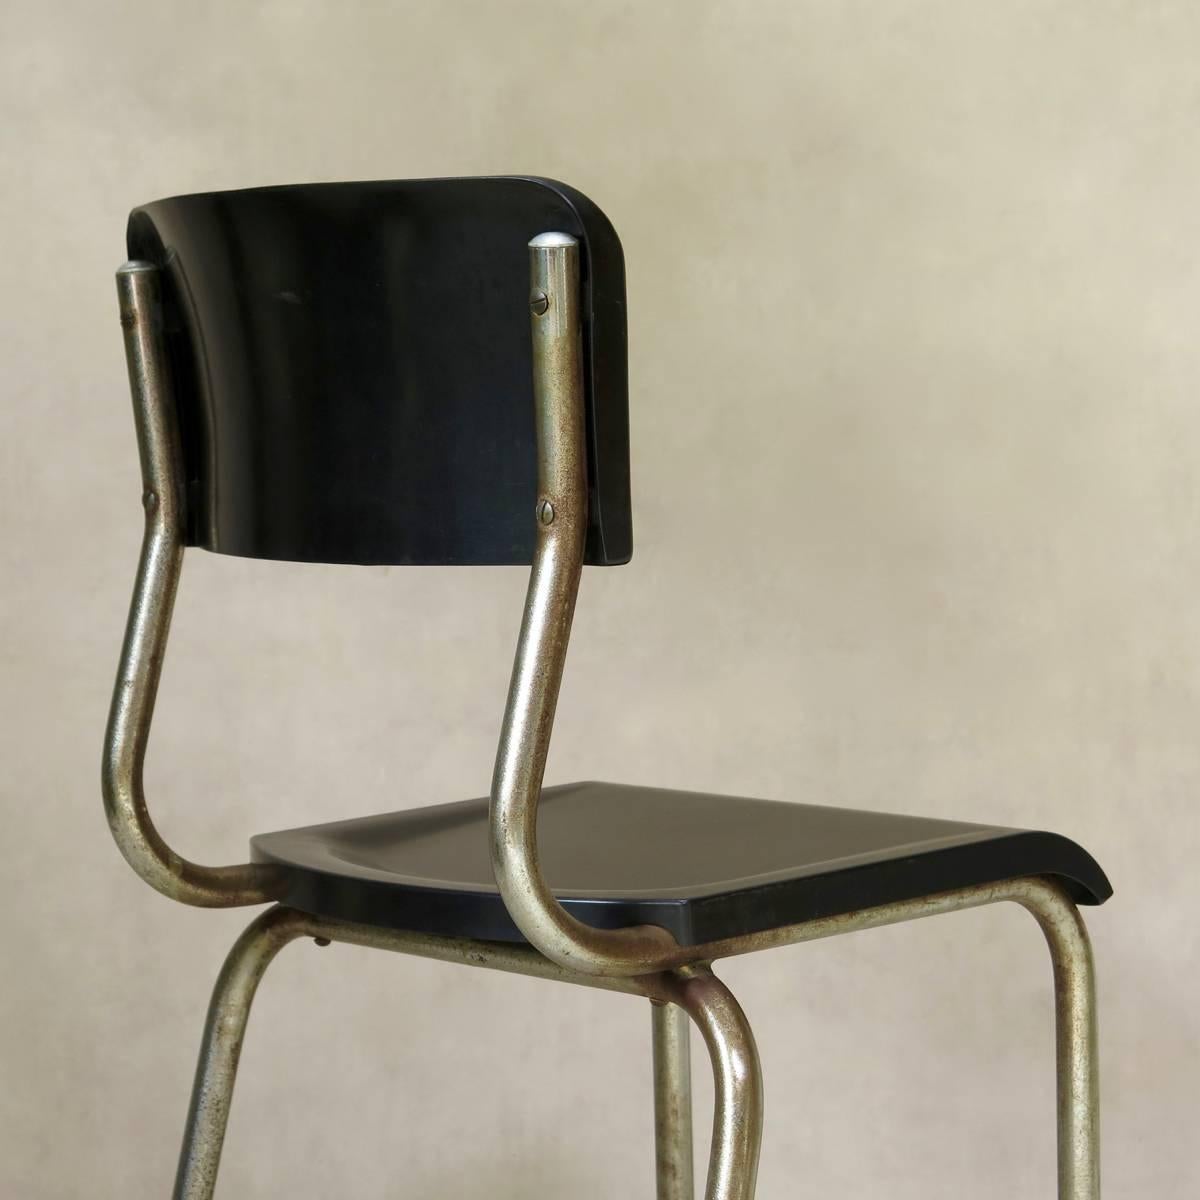 Rene Herbst Bakelite and Chrome Chairs '12 Available', France, 1950s For Sale 1